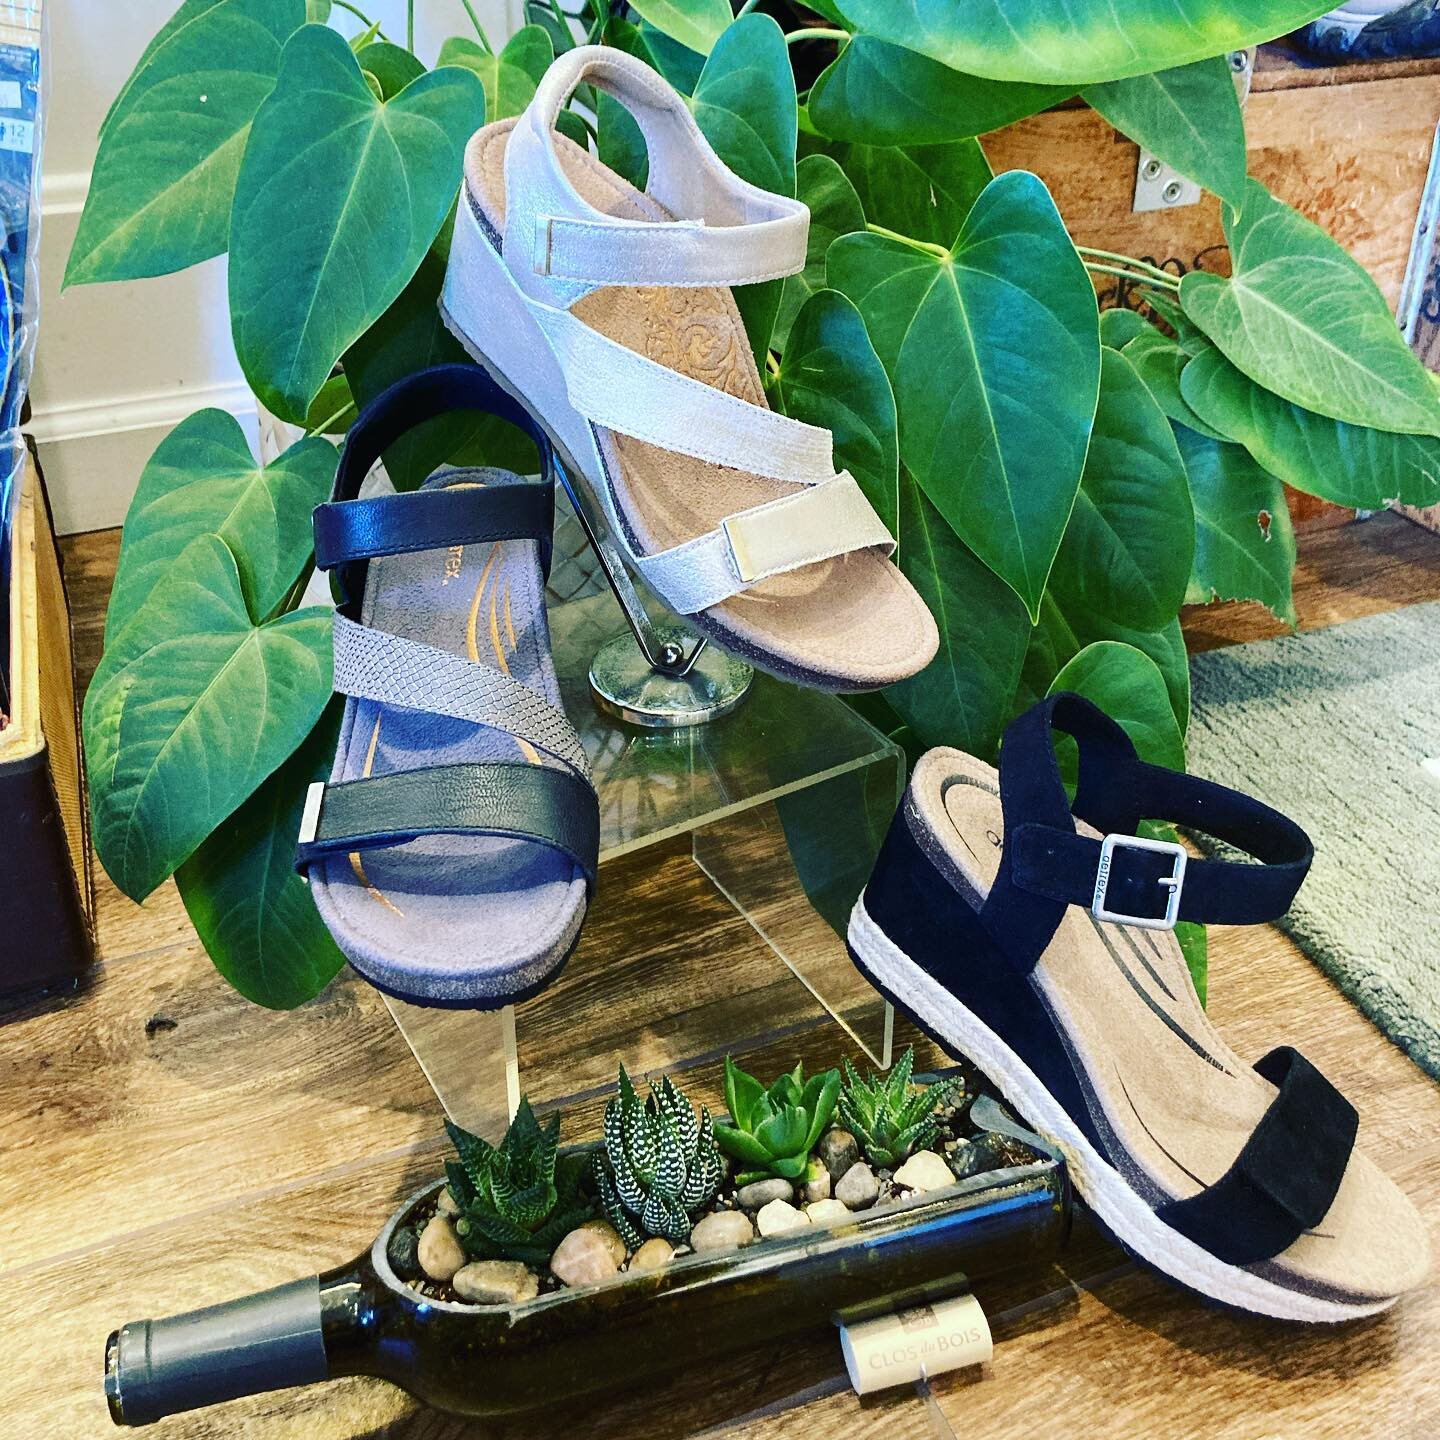 Wine, shoes and plants.  My favorite things! ❤️